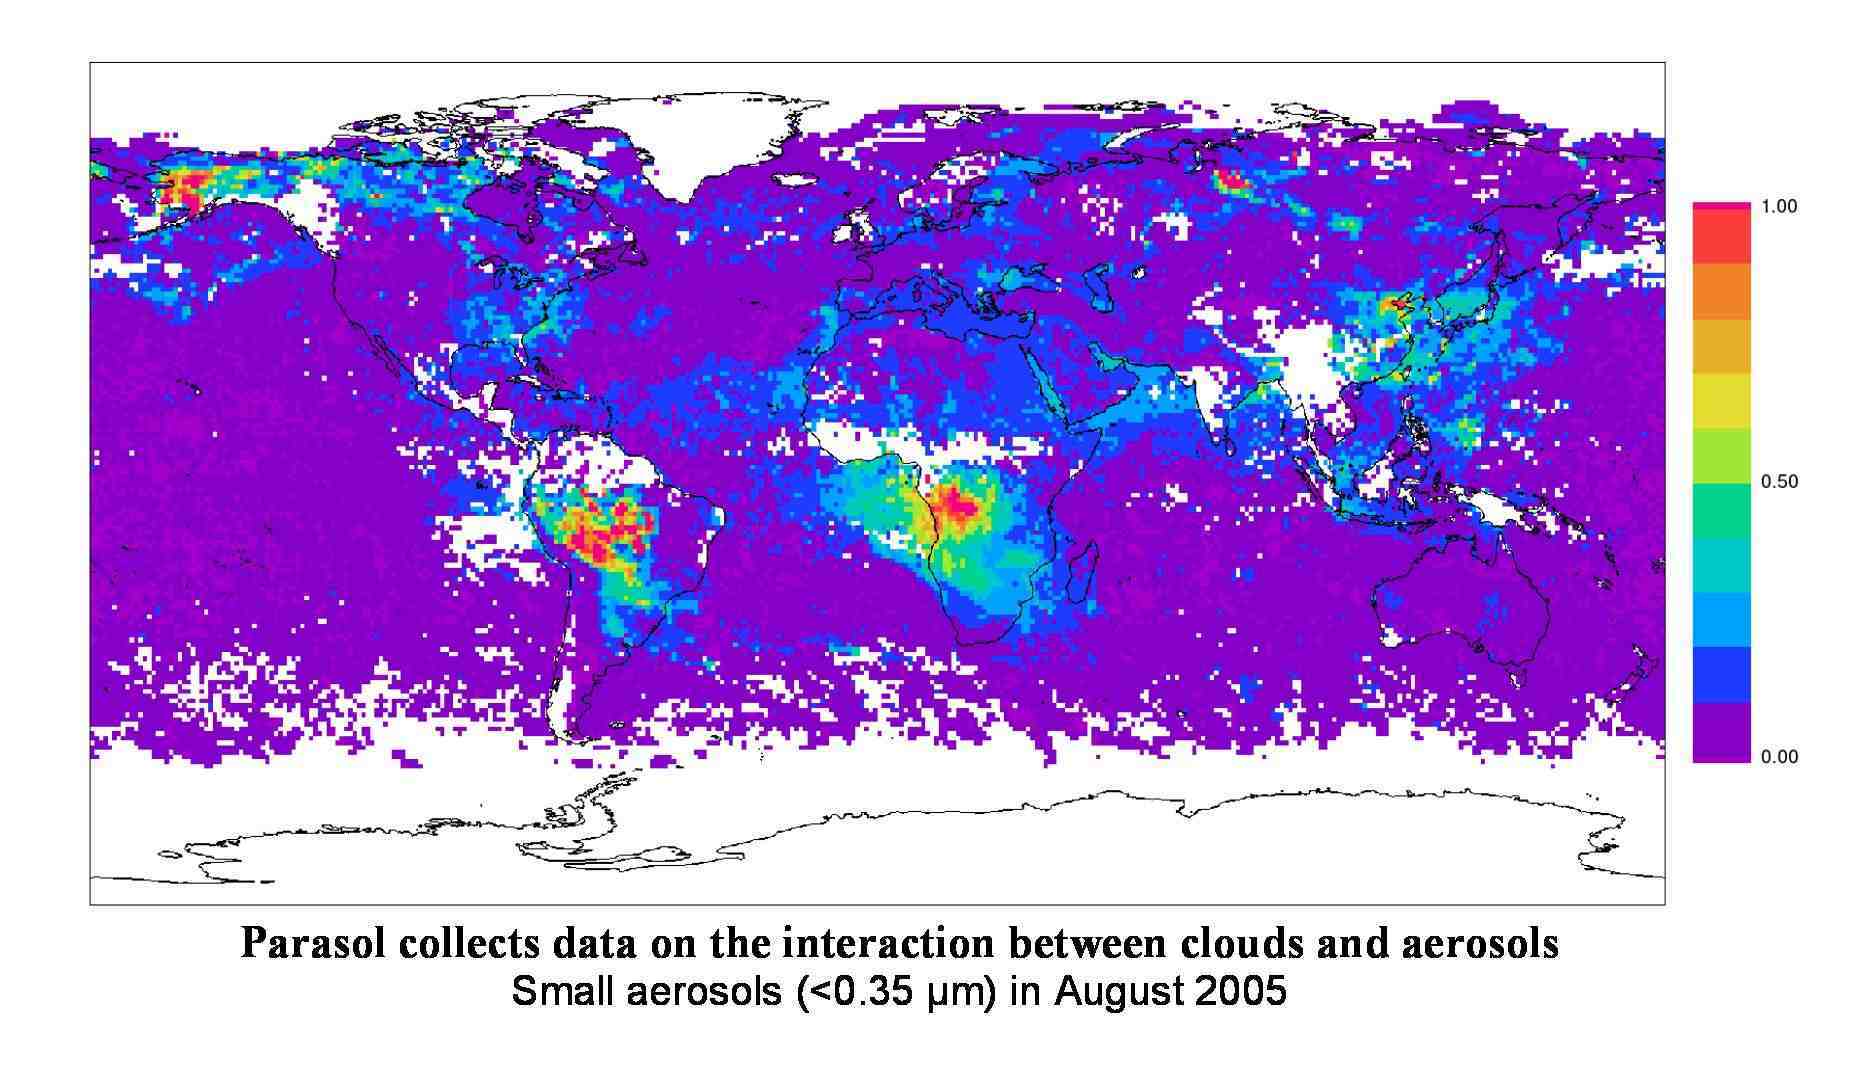 Image of data on aerosols collected by Calipso.